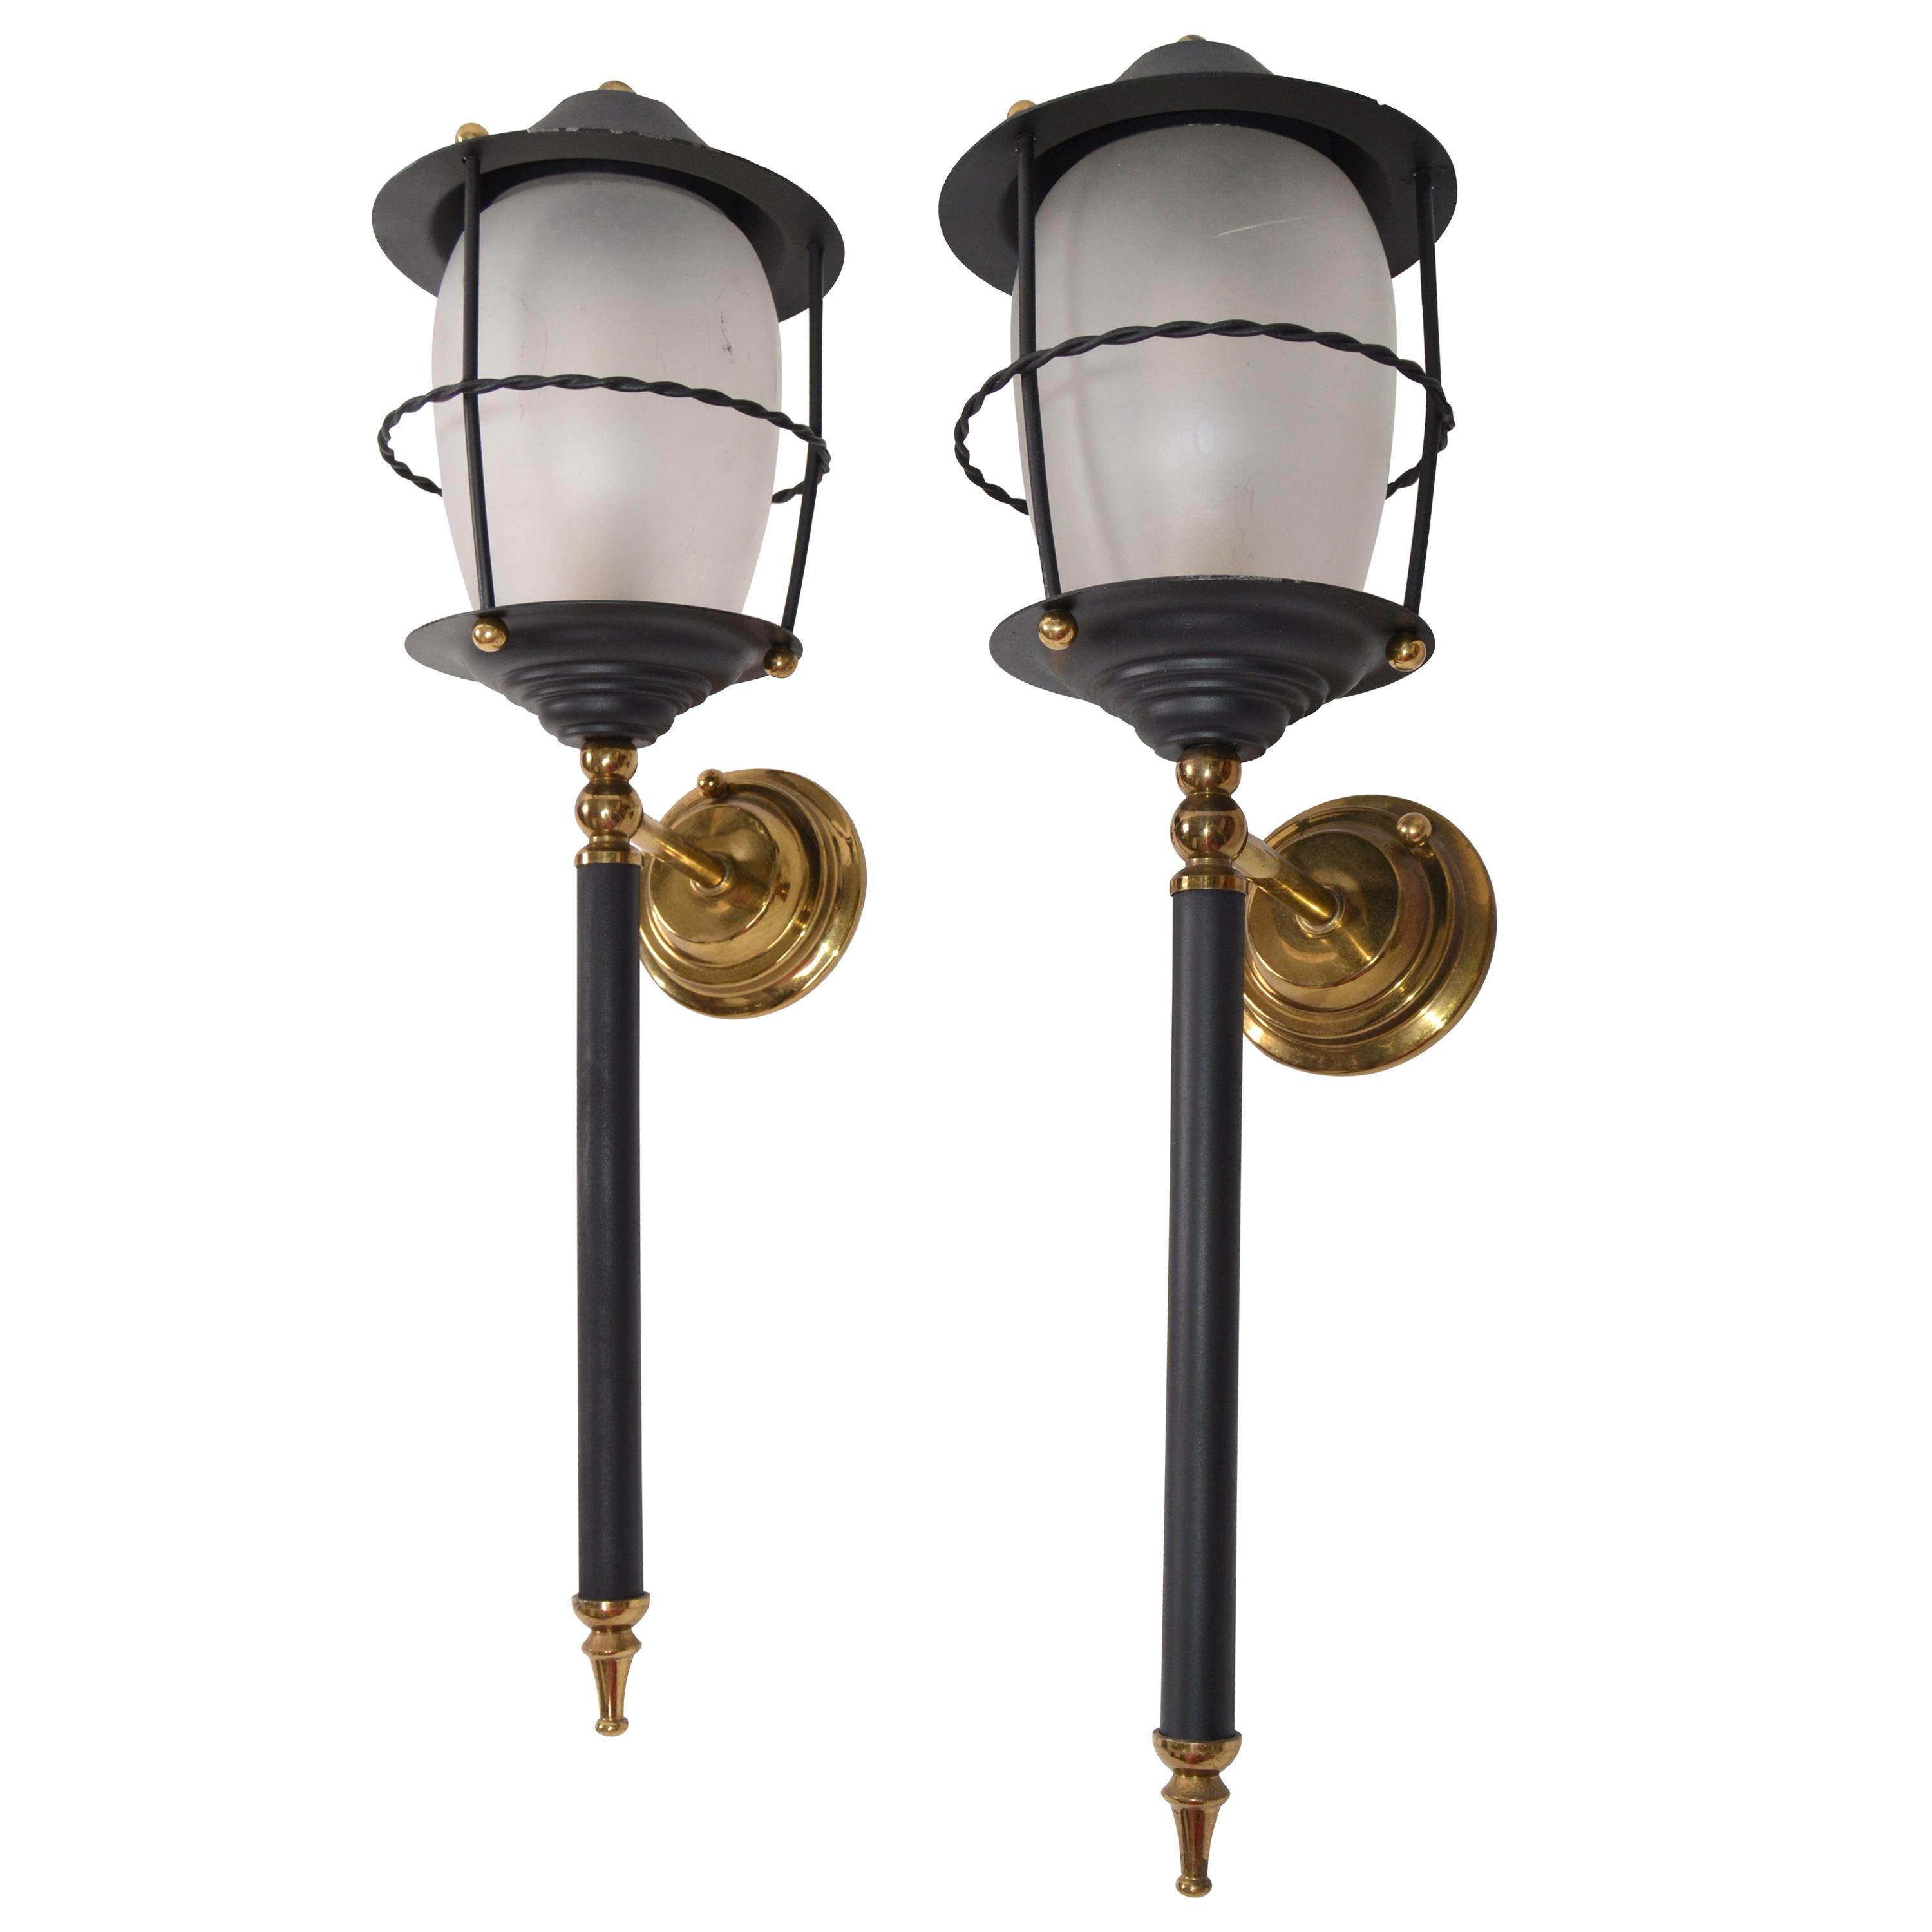 Maison Lunel Pair of Black Glass and Brass Lantern Wall Mounted Sconces France